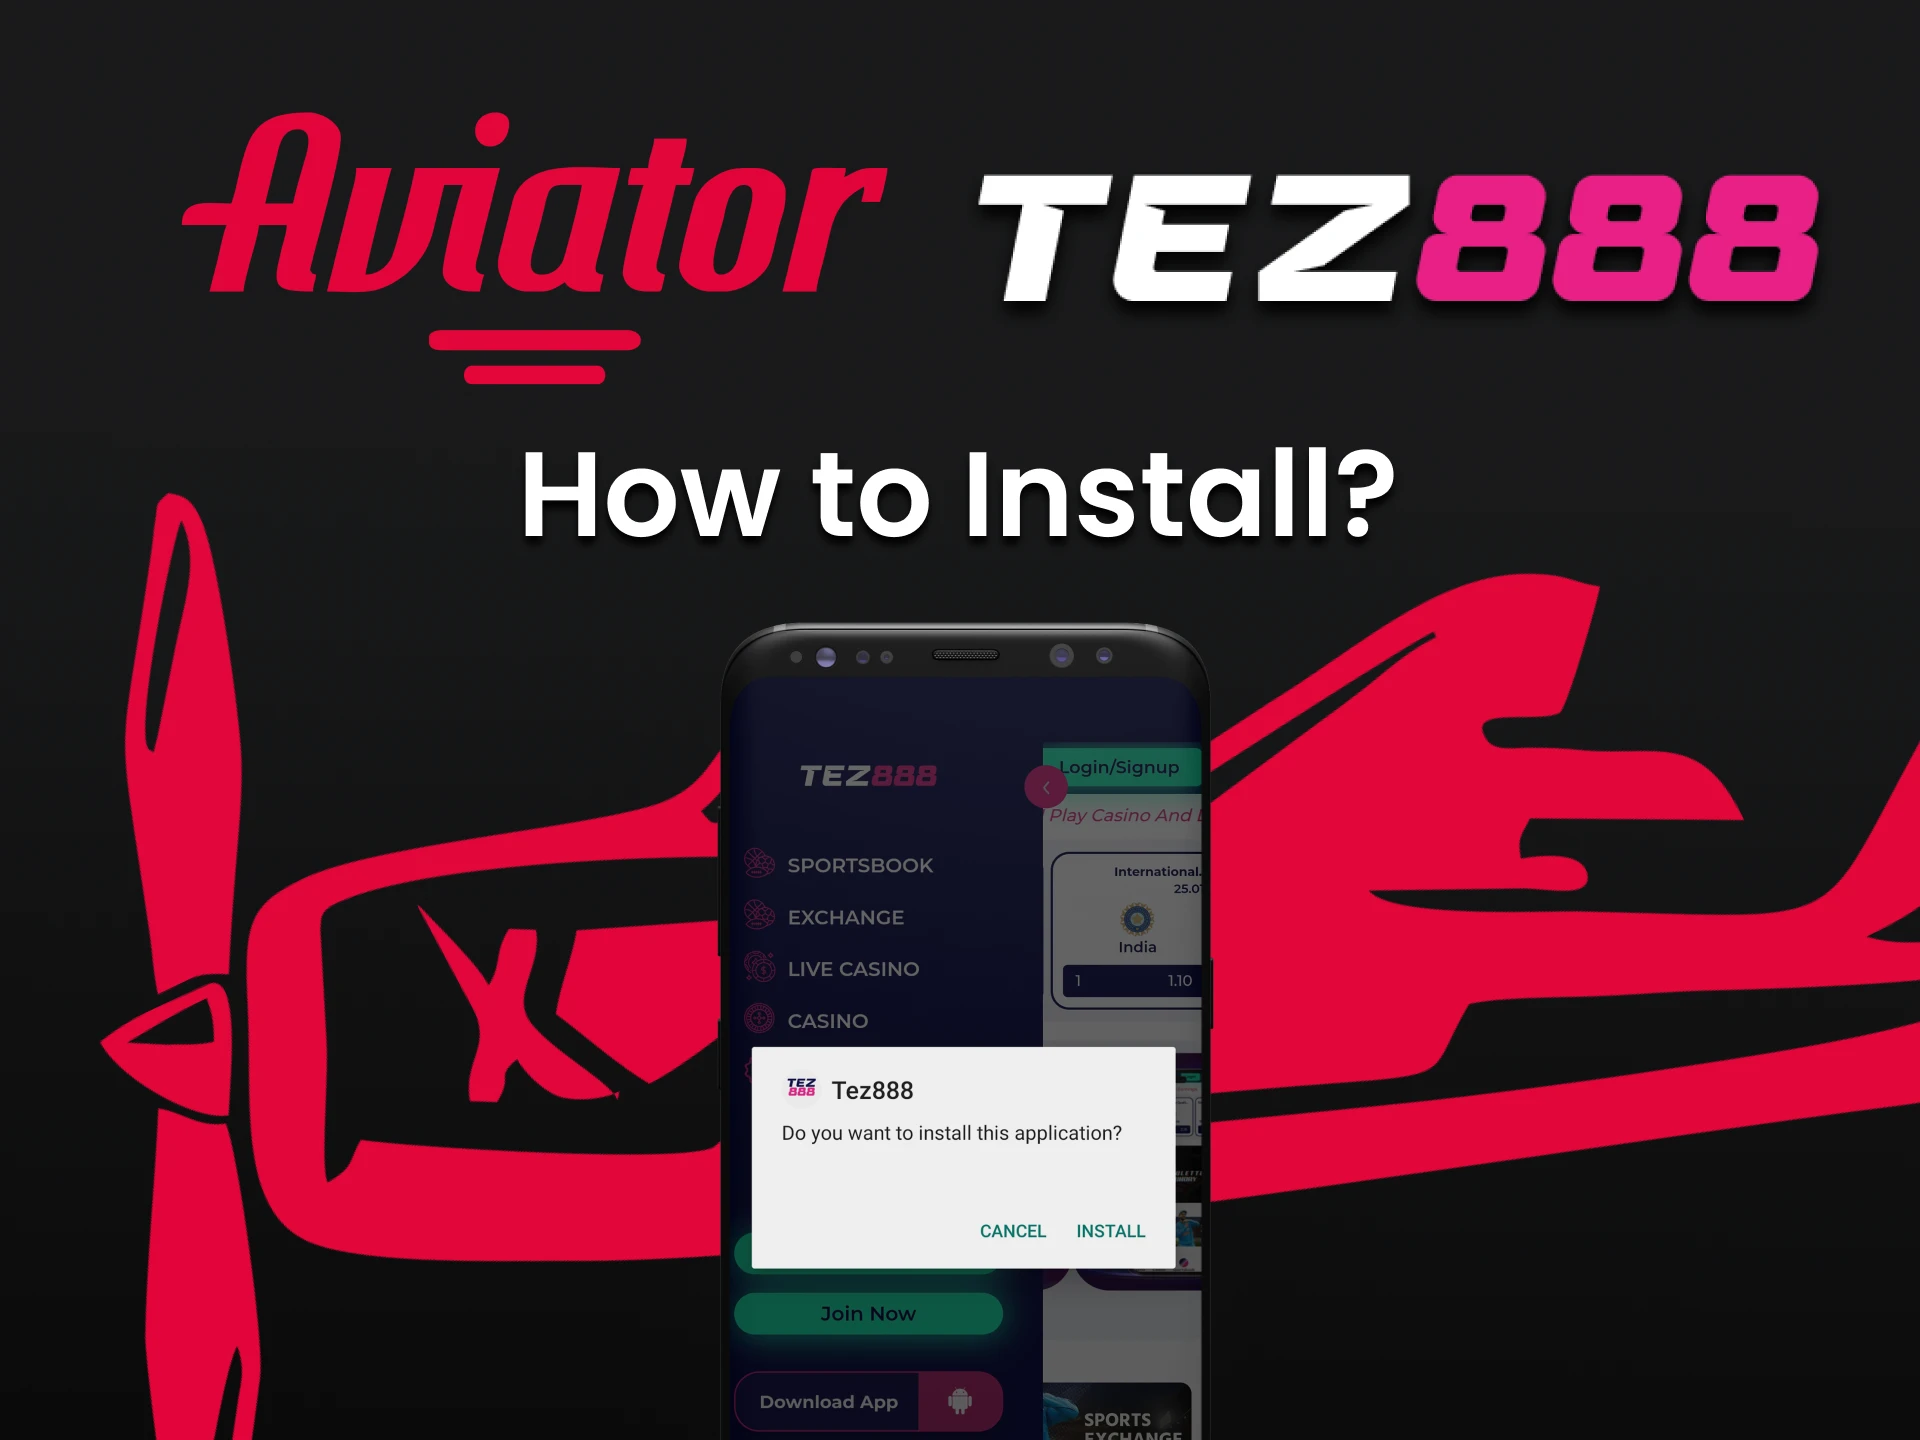 We will tell you how to install the Tez888 application to play Aviator.